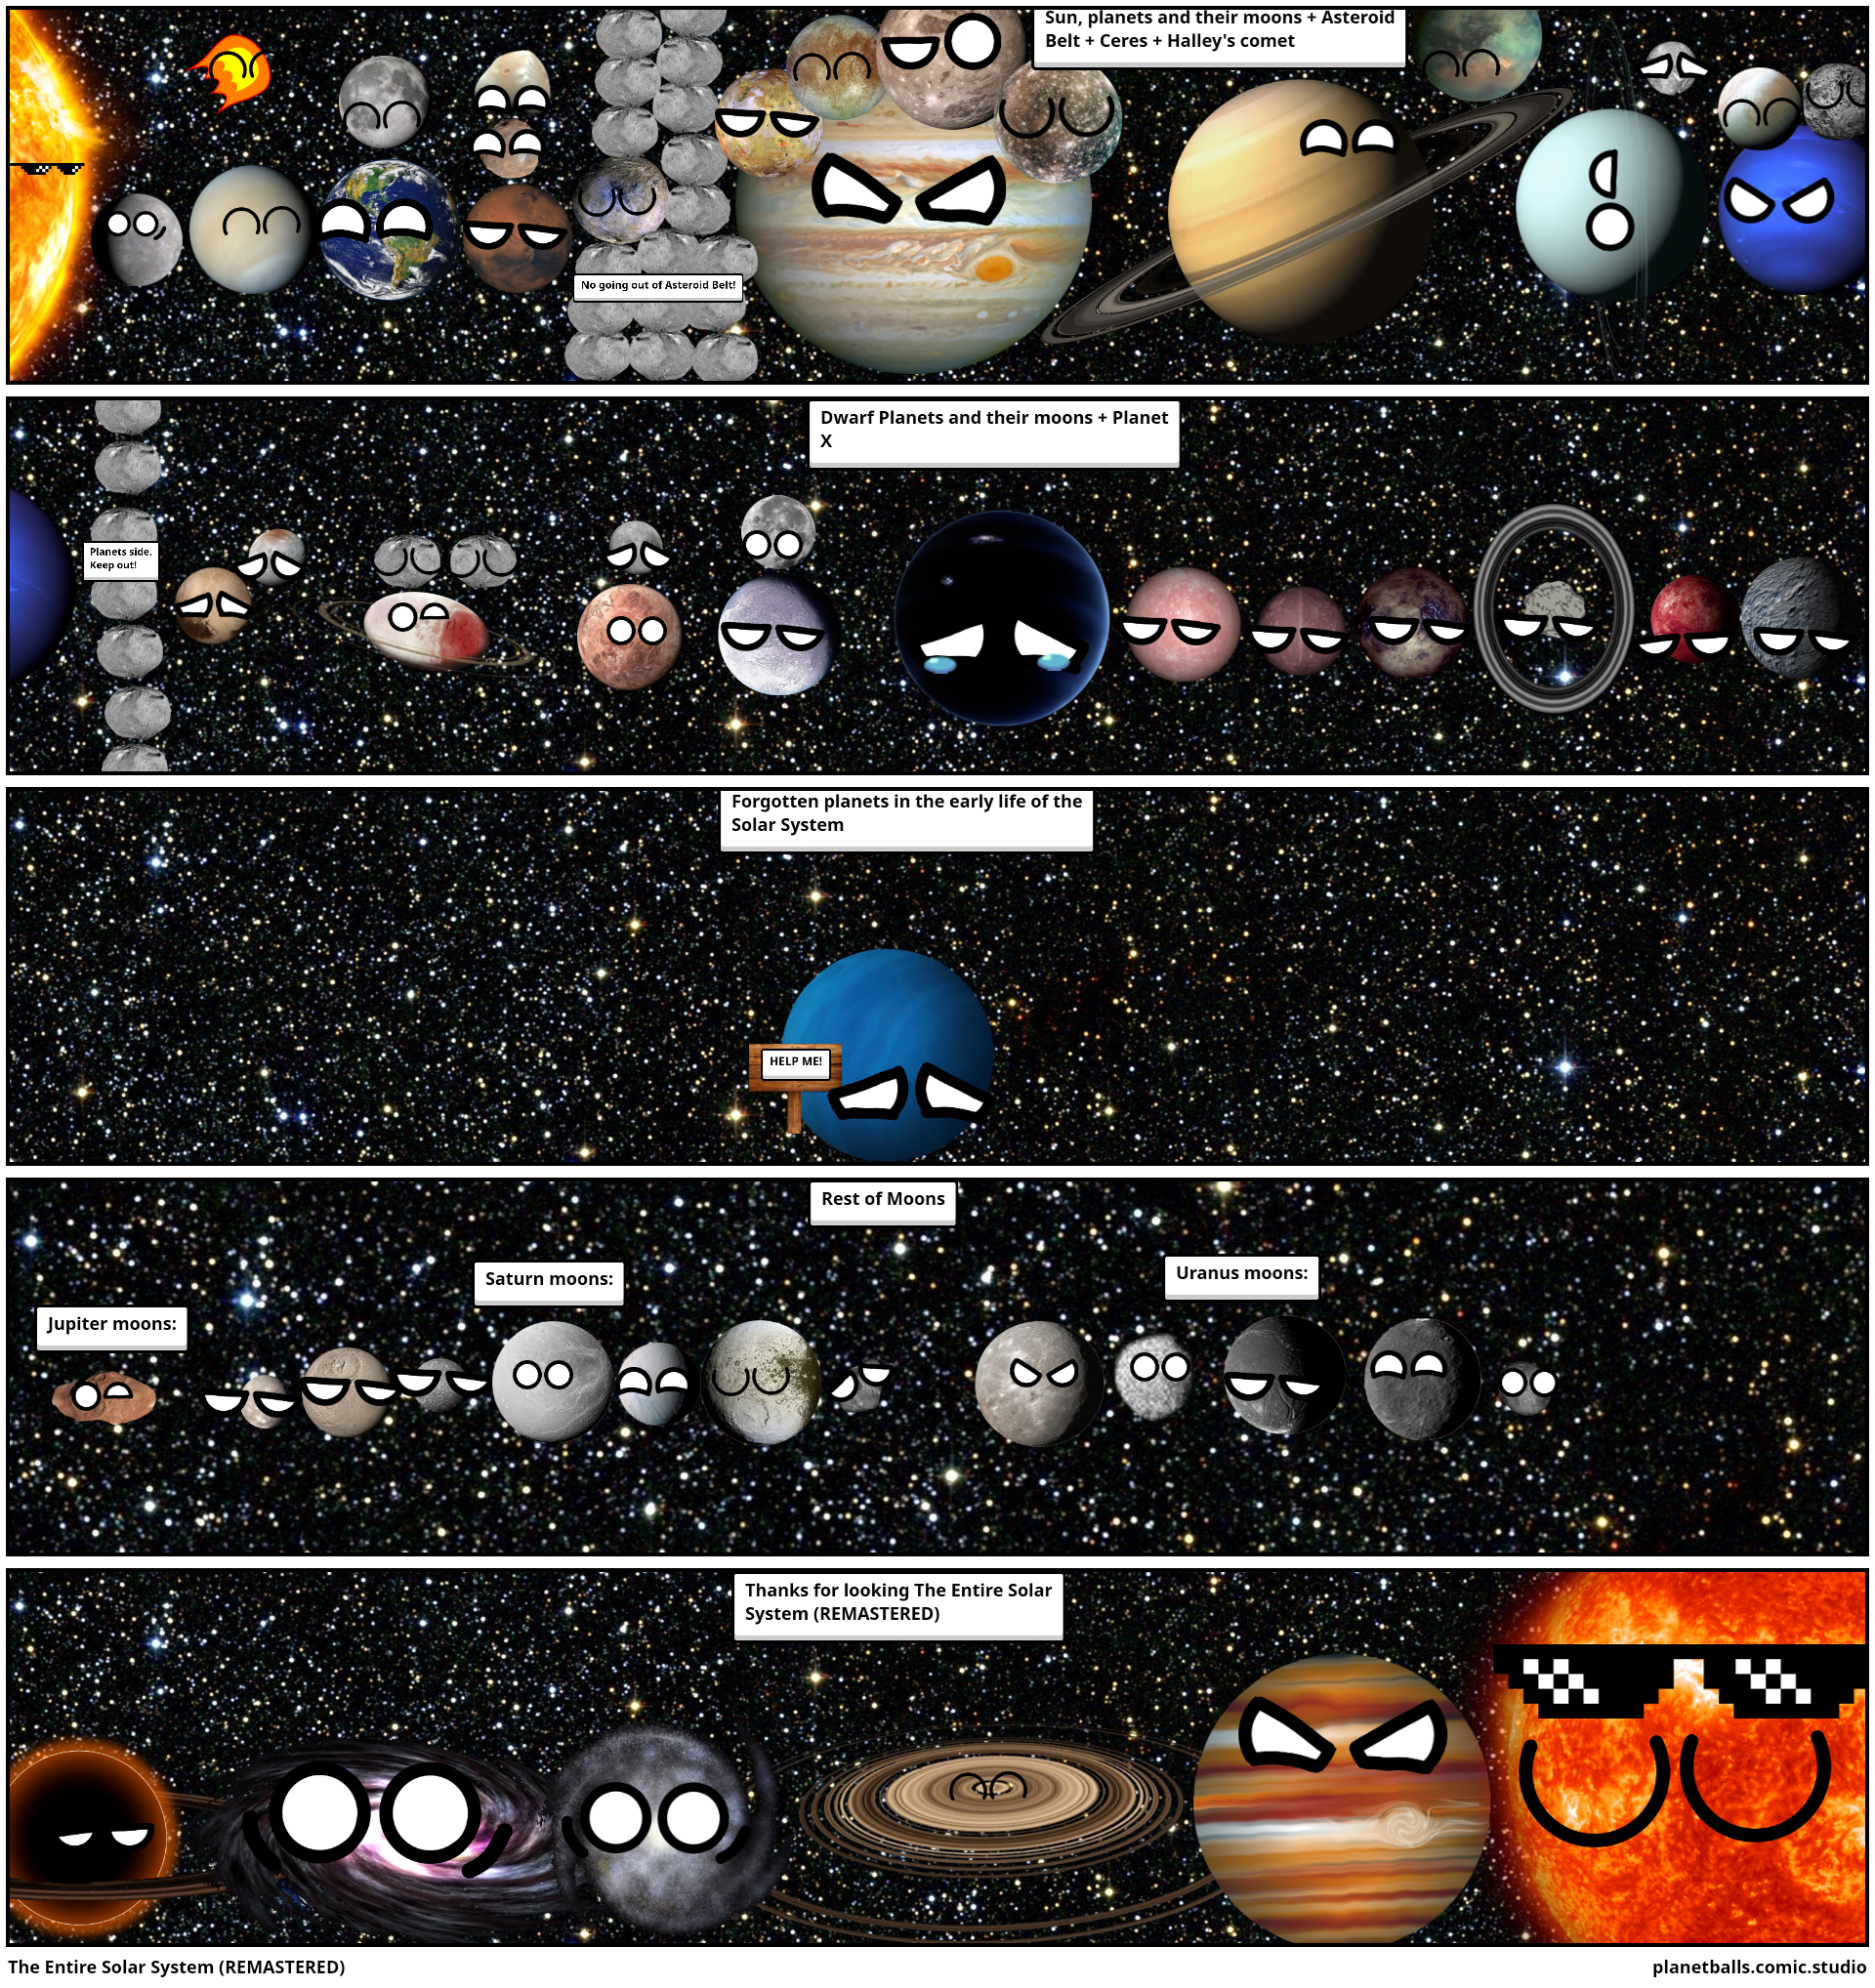 The Entire Solar System (REMASTERED) 